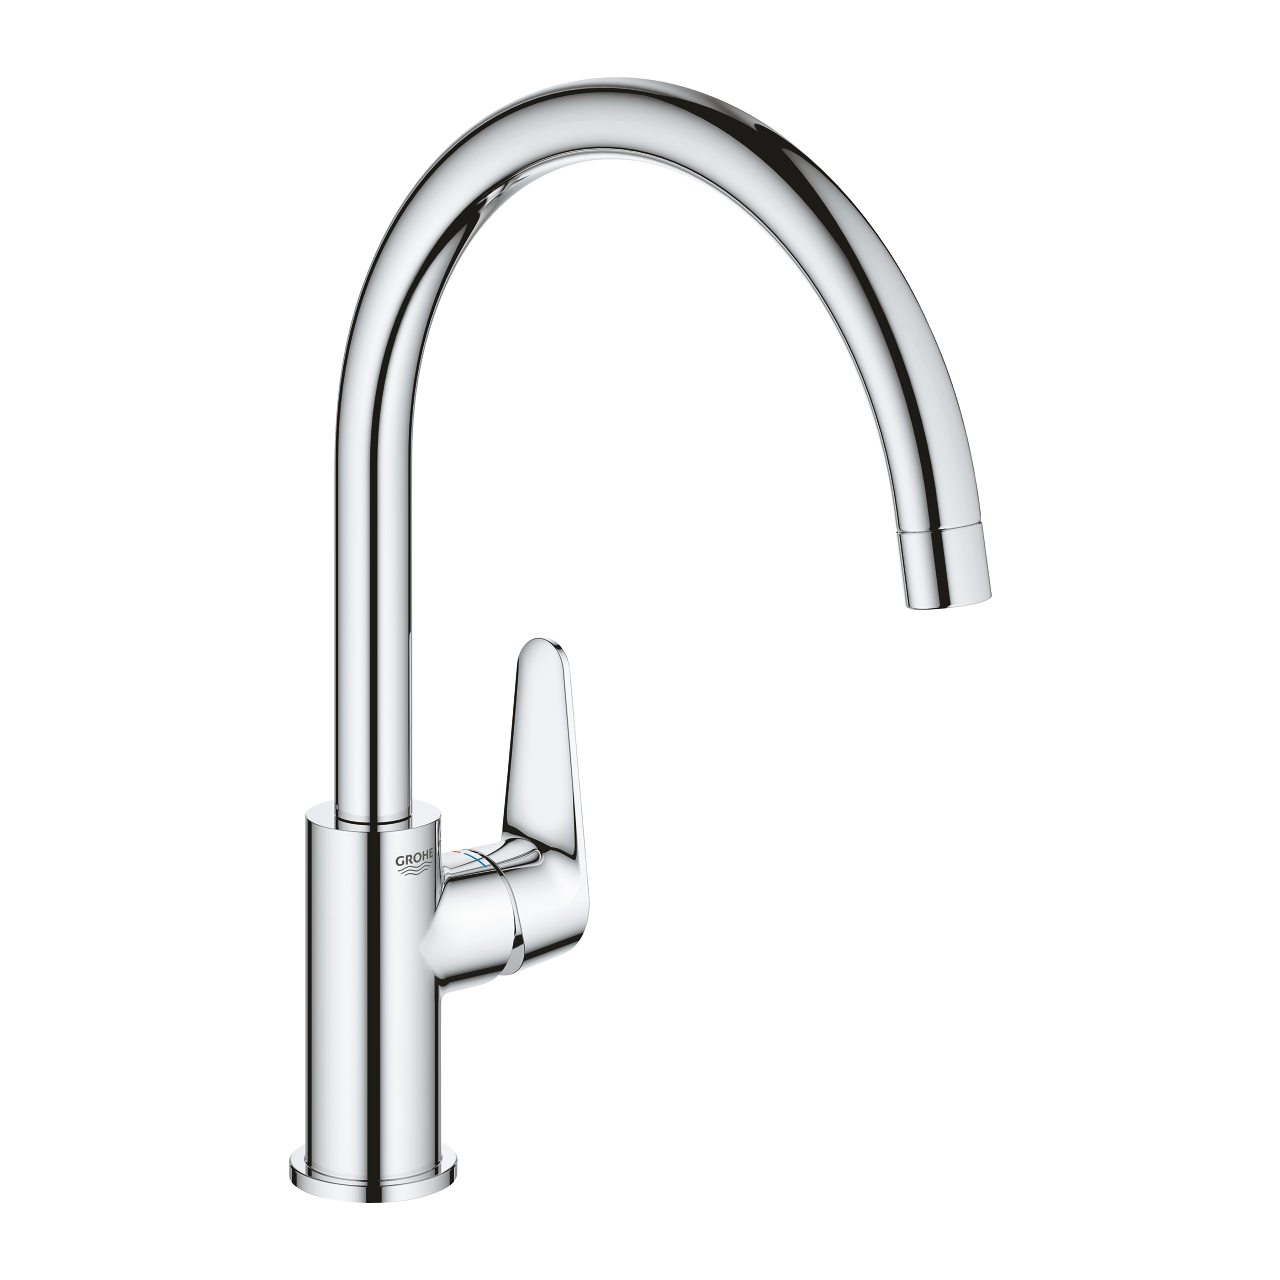 Baterie Bucatarie Grohe Baucurve Pipa C Crom